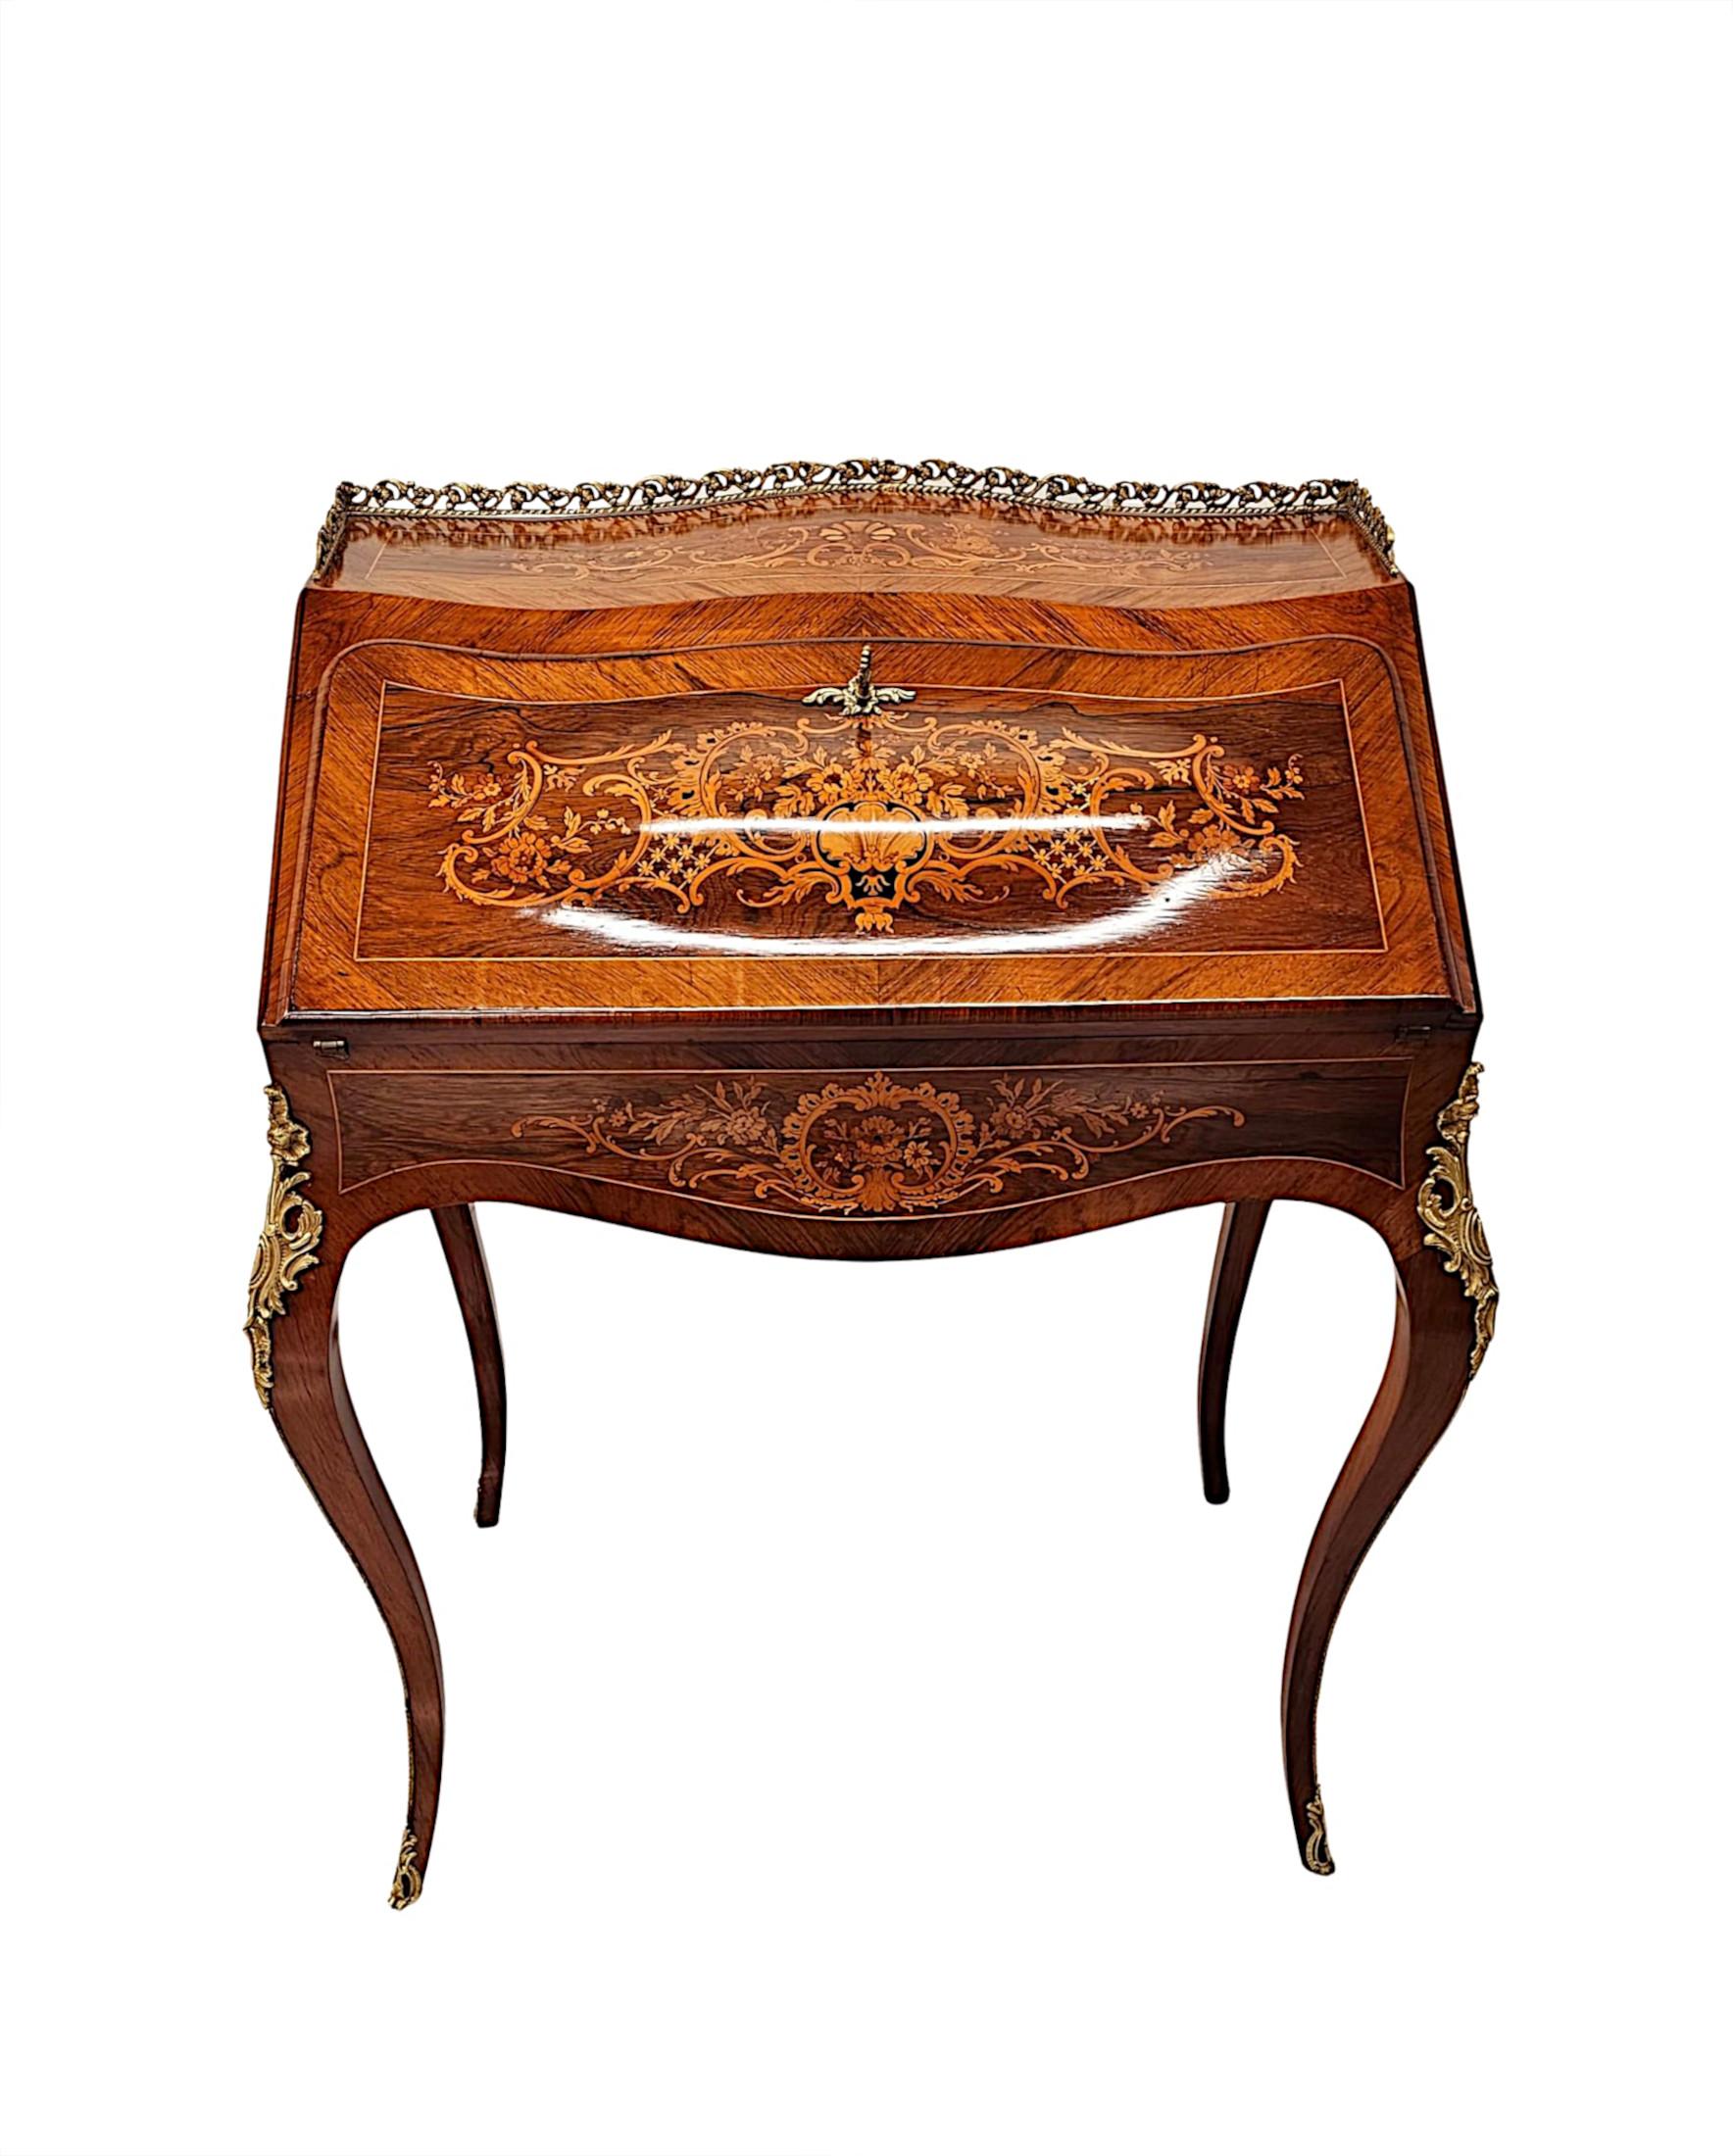 A Very Fine 19th Century Marquetry Inlaid Bureau Du Dame For Sale 2